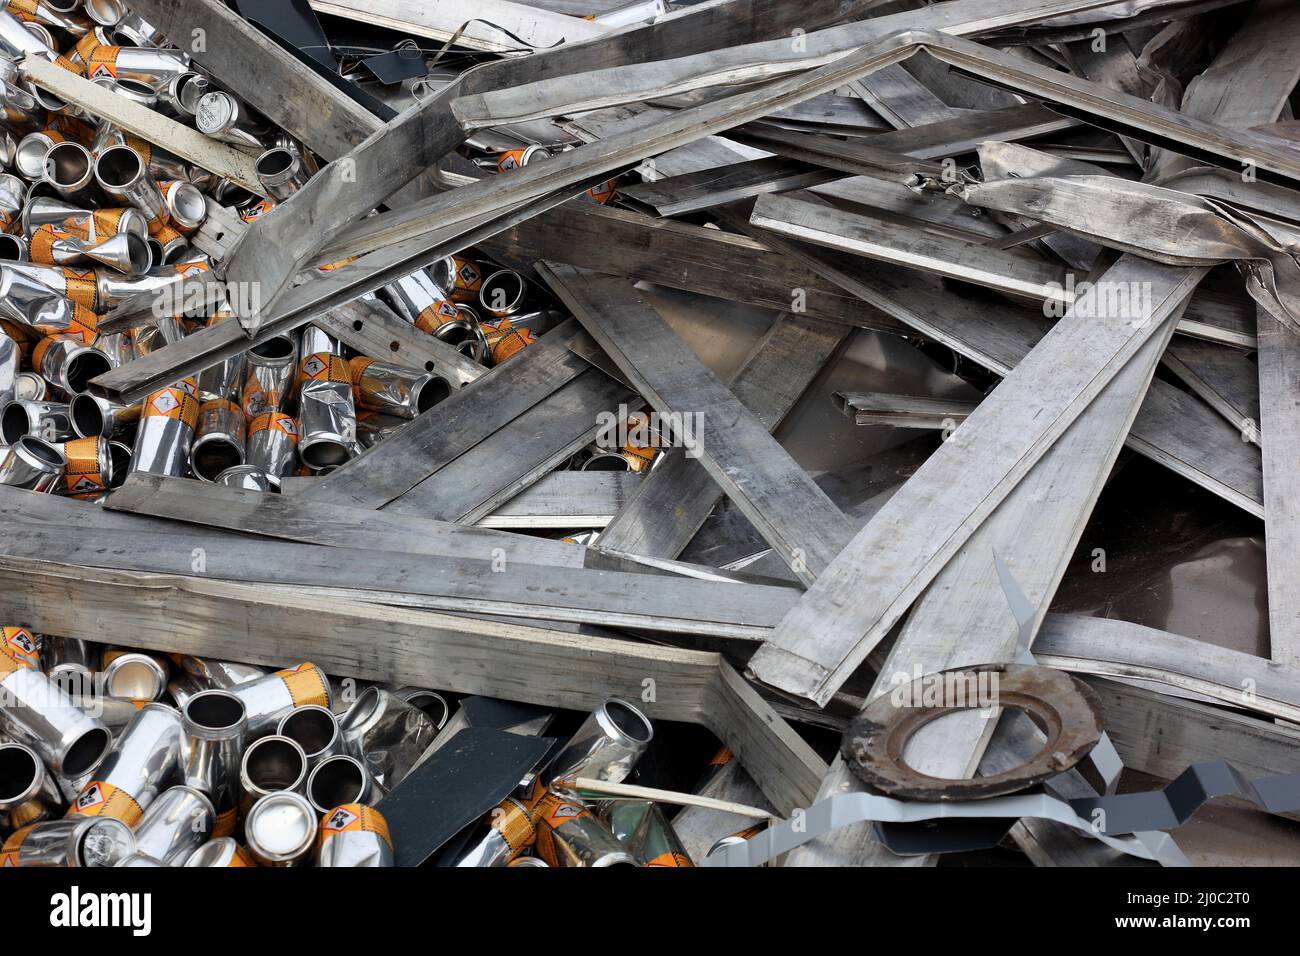 Altmetall, Aluminium und Edelstahl zum Recycling  /  Scrap metal, aluminum and stainless steel for recycling Stock Photo